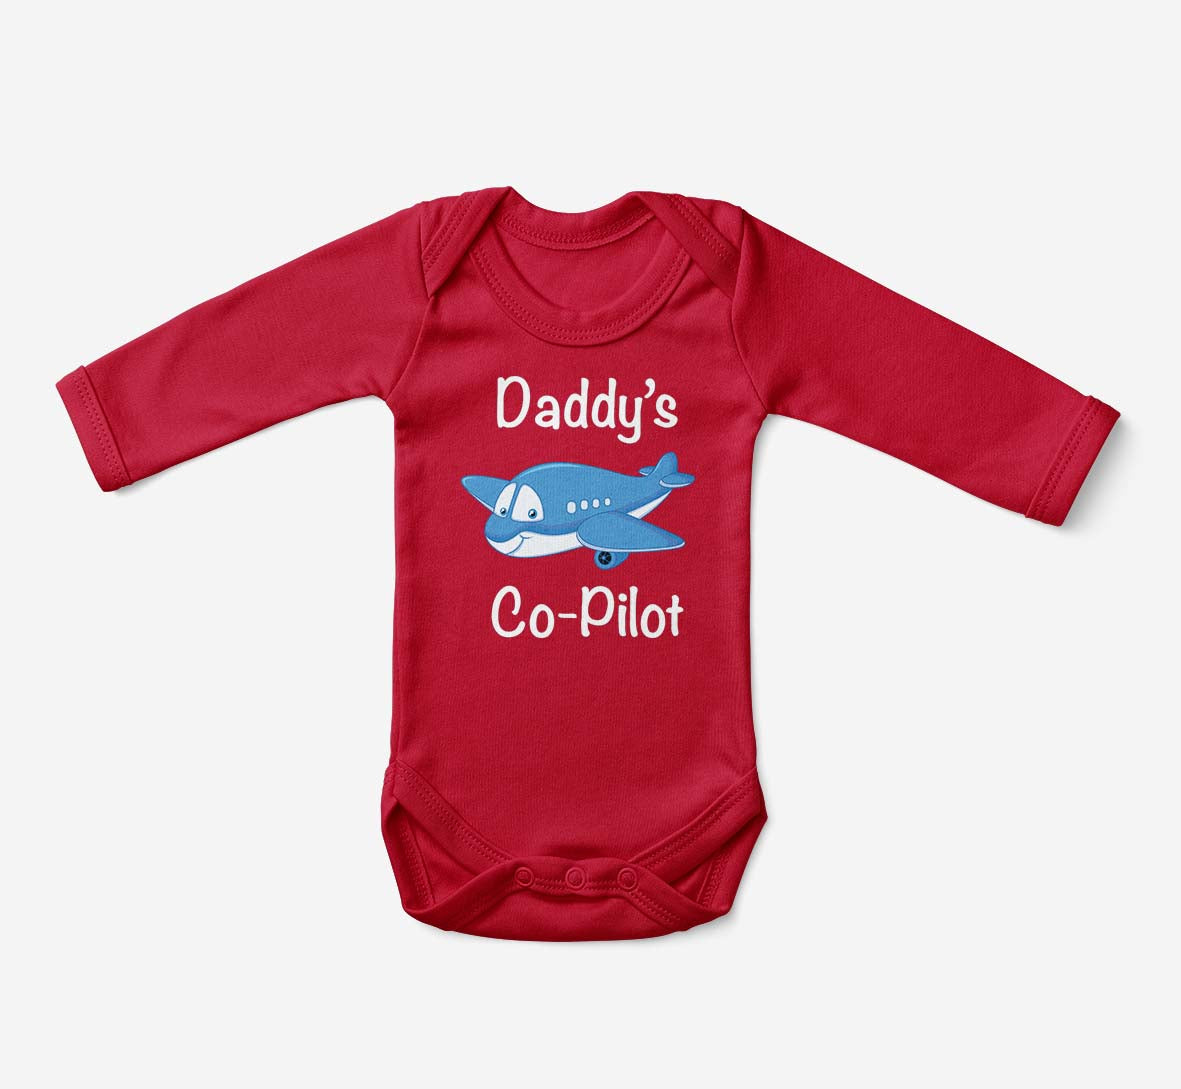 Daddy's Co-Pilot (Jet Airplane) Designed Baby Bodysuits